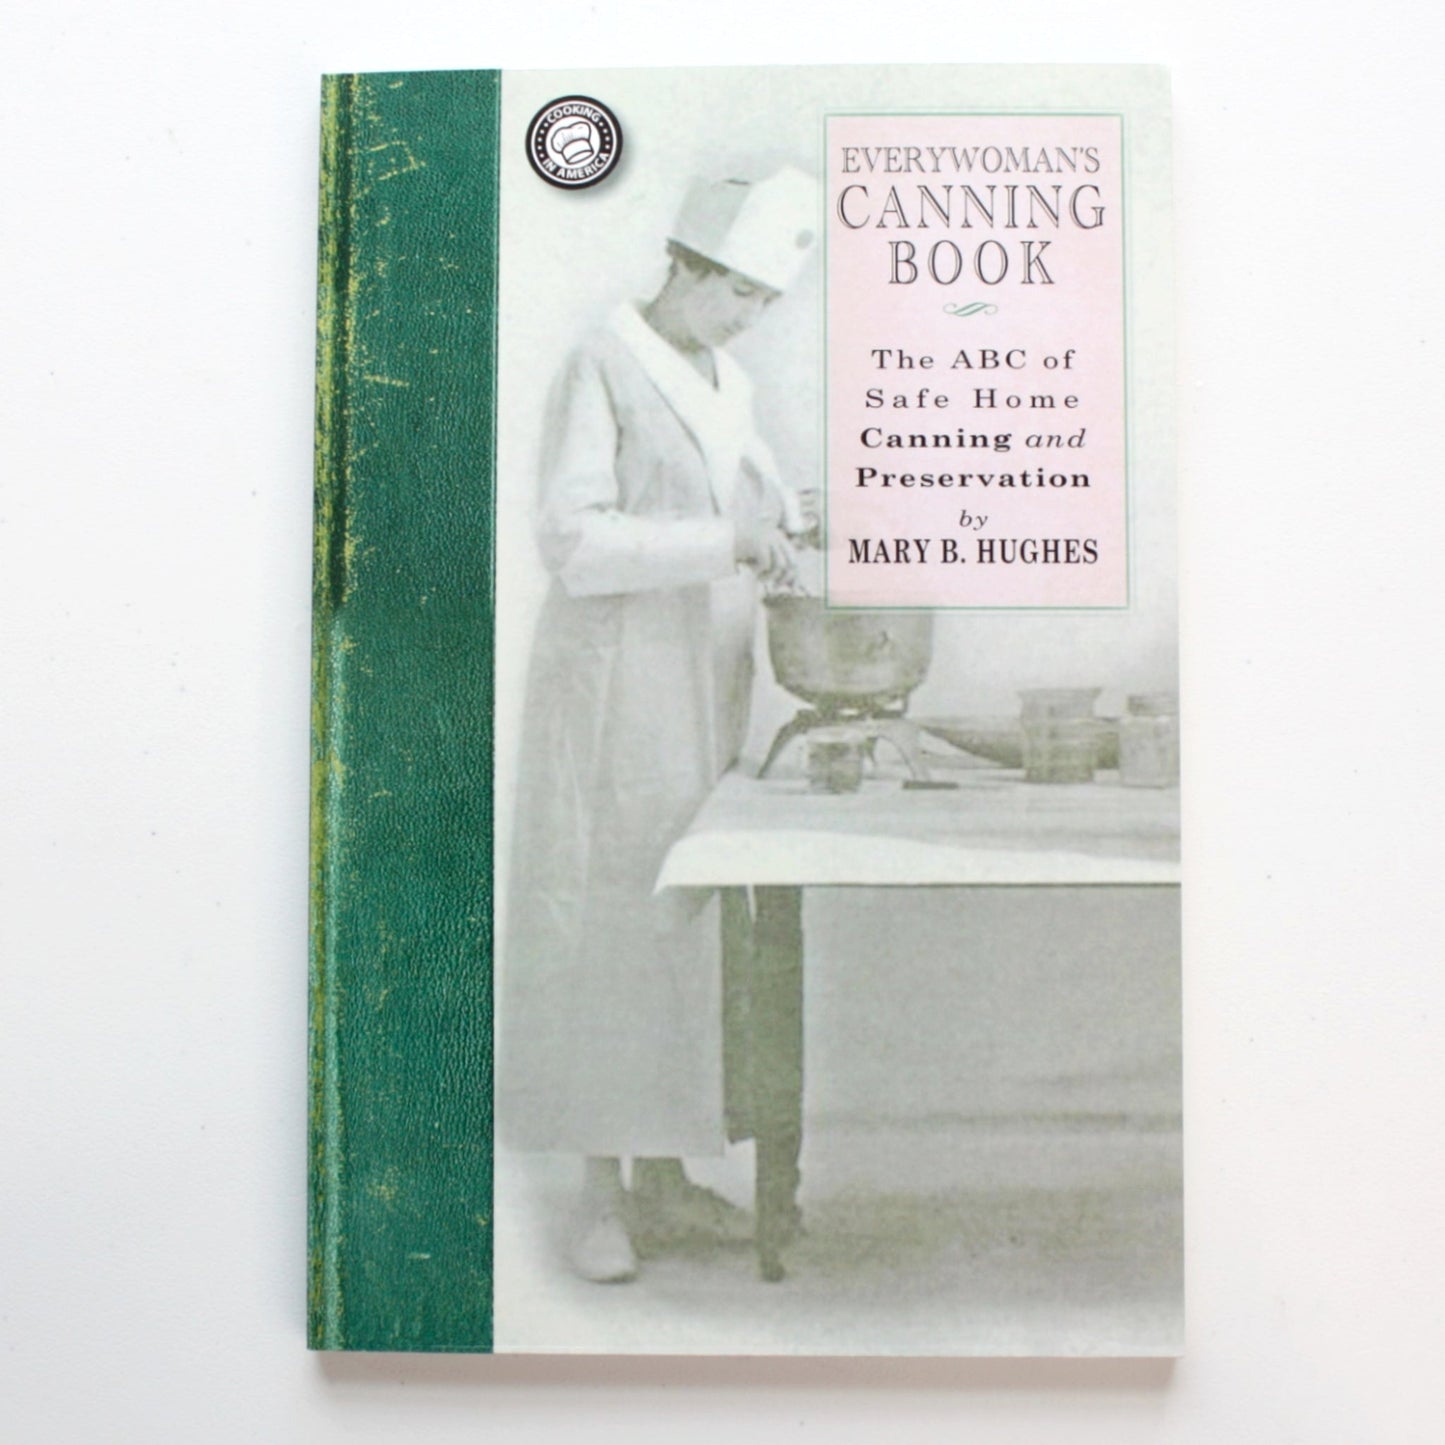 Everywoman's Canning Book - Made in the USA